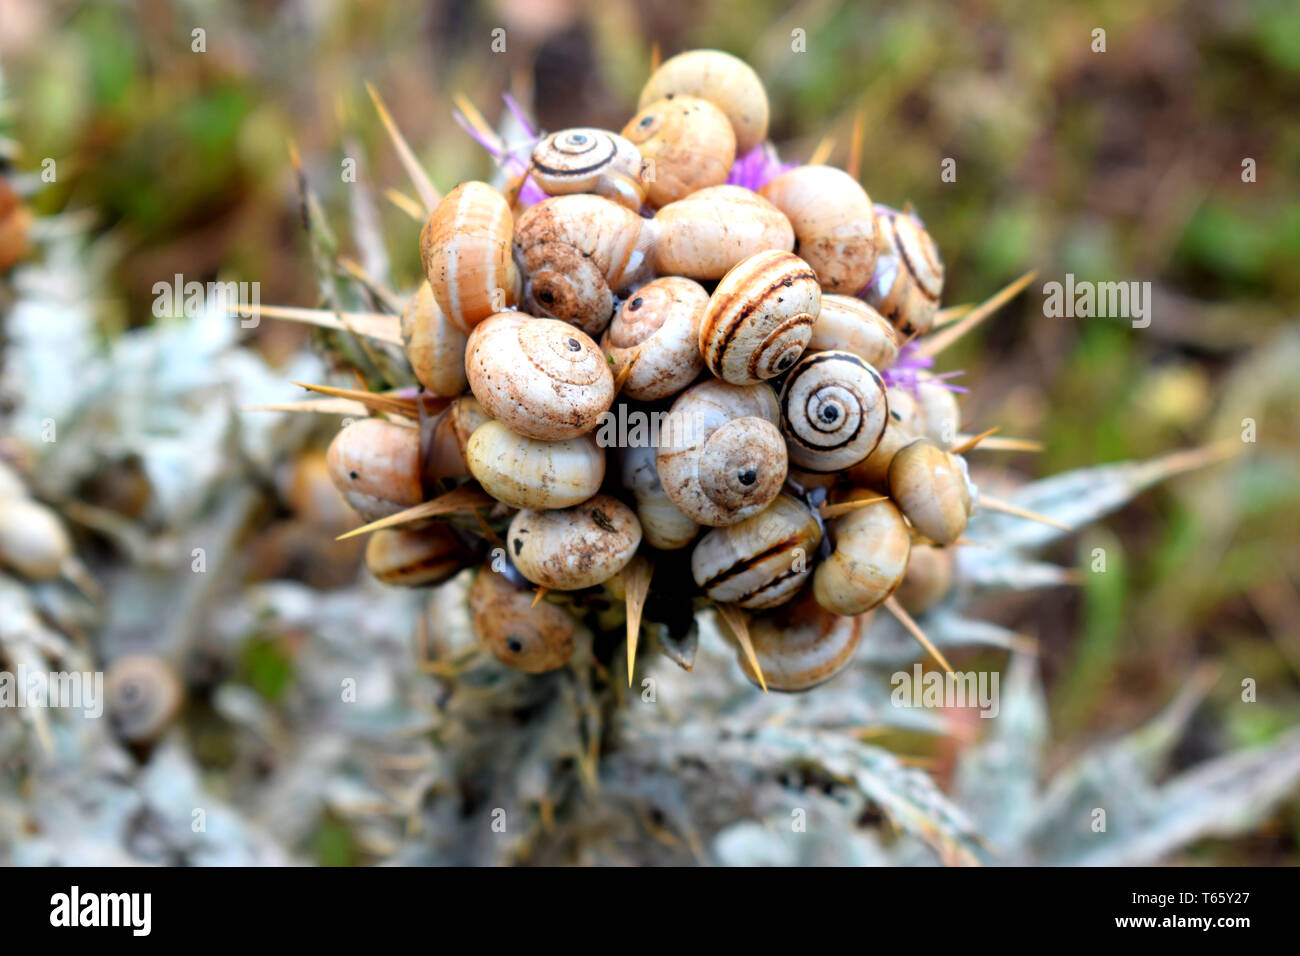 group of snails on thistle : Close up of a snail colony on thistle Stock Photo